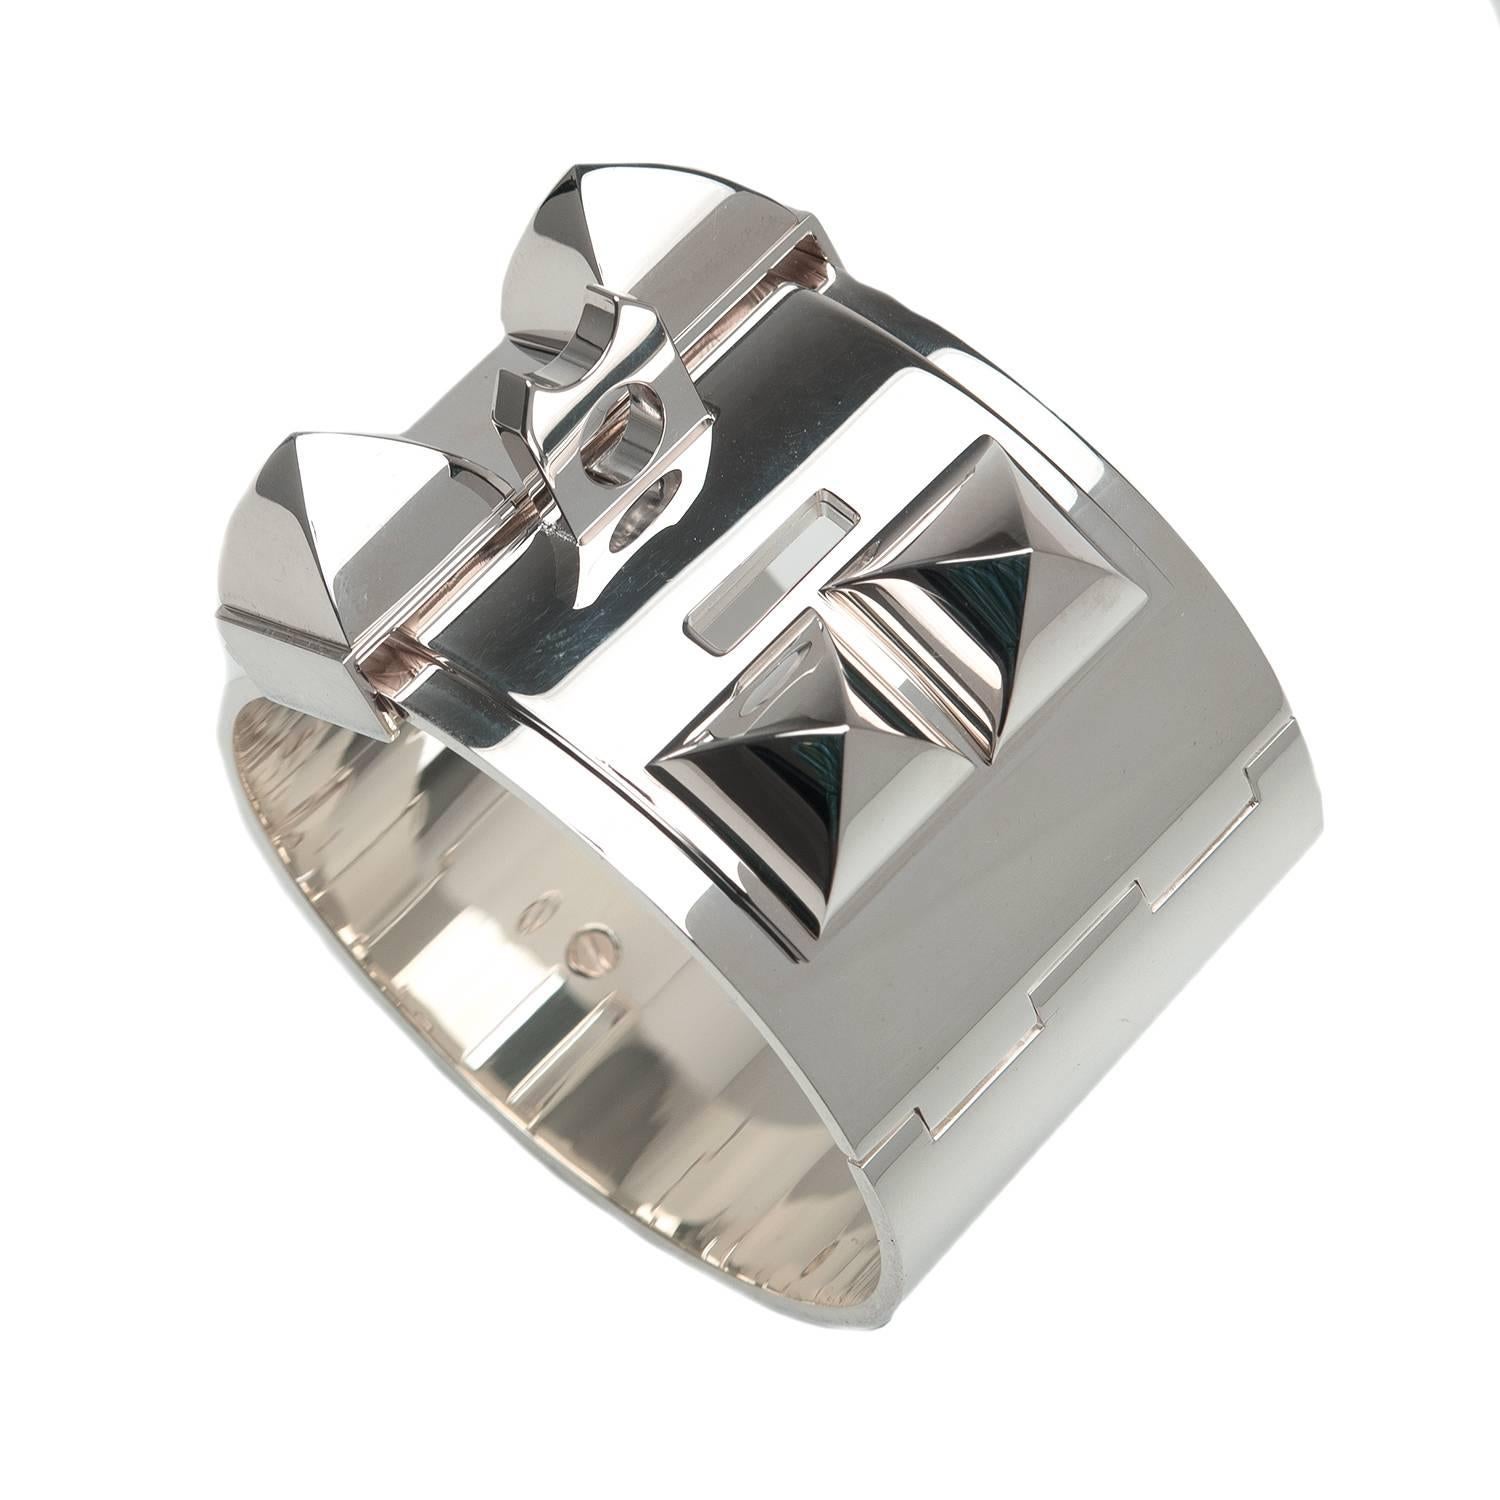 Hermes Collier de Chien (CDC) in sterling silver in a size Small.

This cuff, made entirely of sterling silver, features sterling silver pyramid studs, center ring and adjustable closure.

Origin: Germany

Condition: Pristine, never